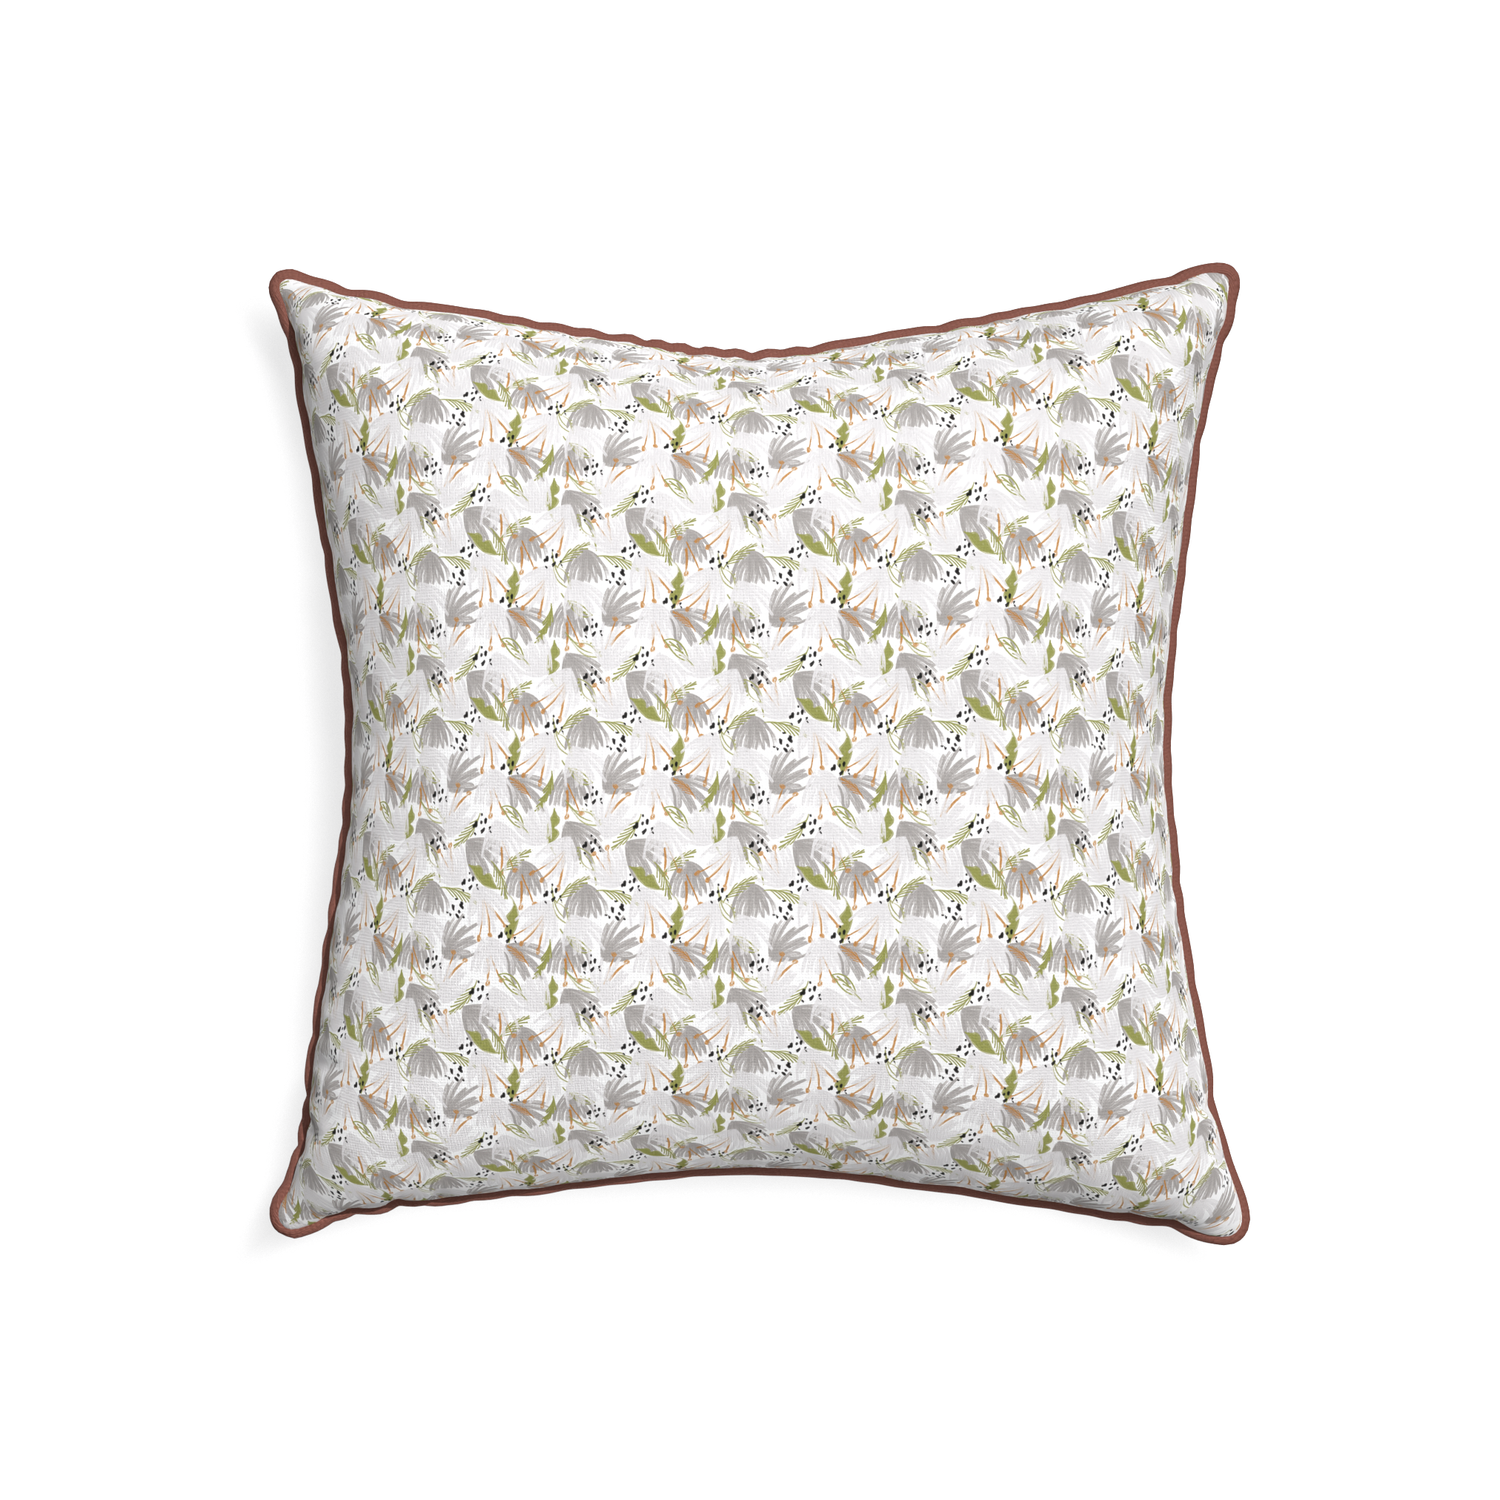 22-square eden grey custom grey floralpillow with w piping on white background